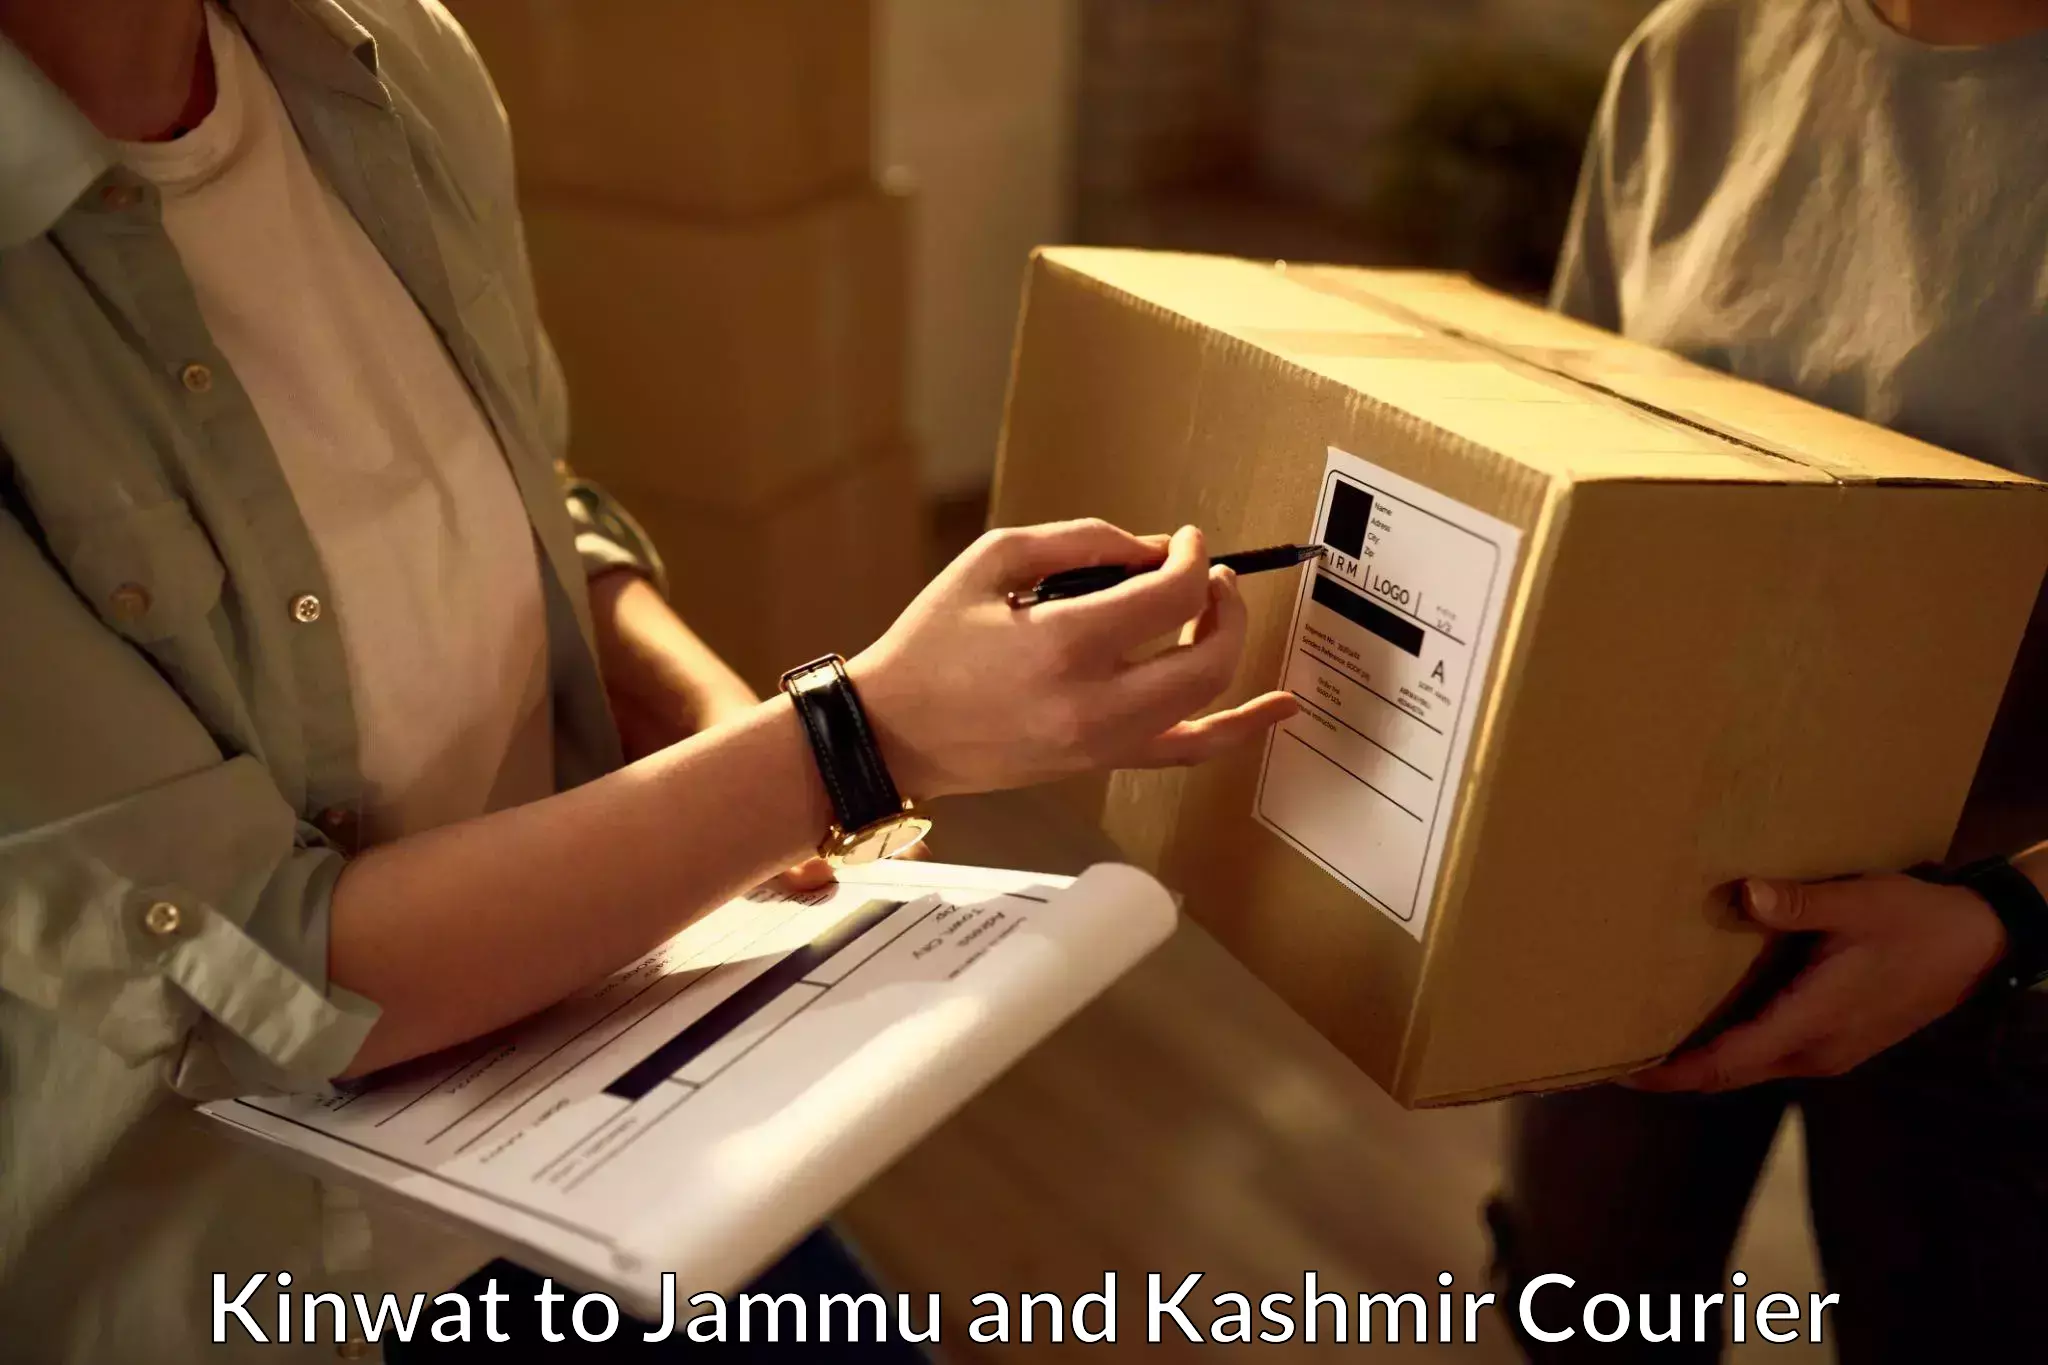 24/7 courier service in Kinwat to Jammu and Kashmir